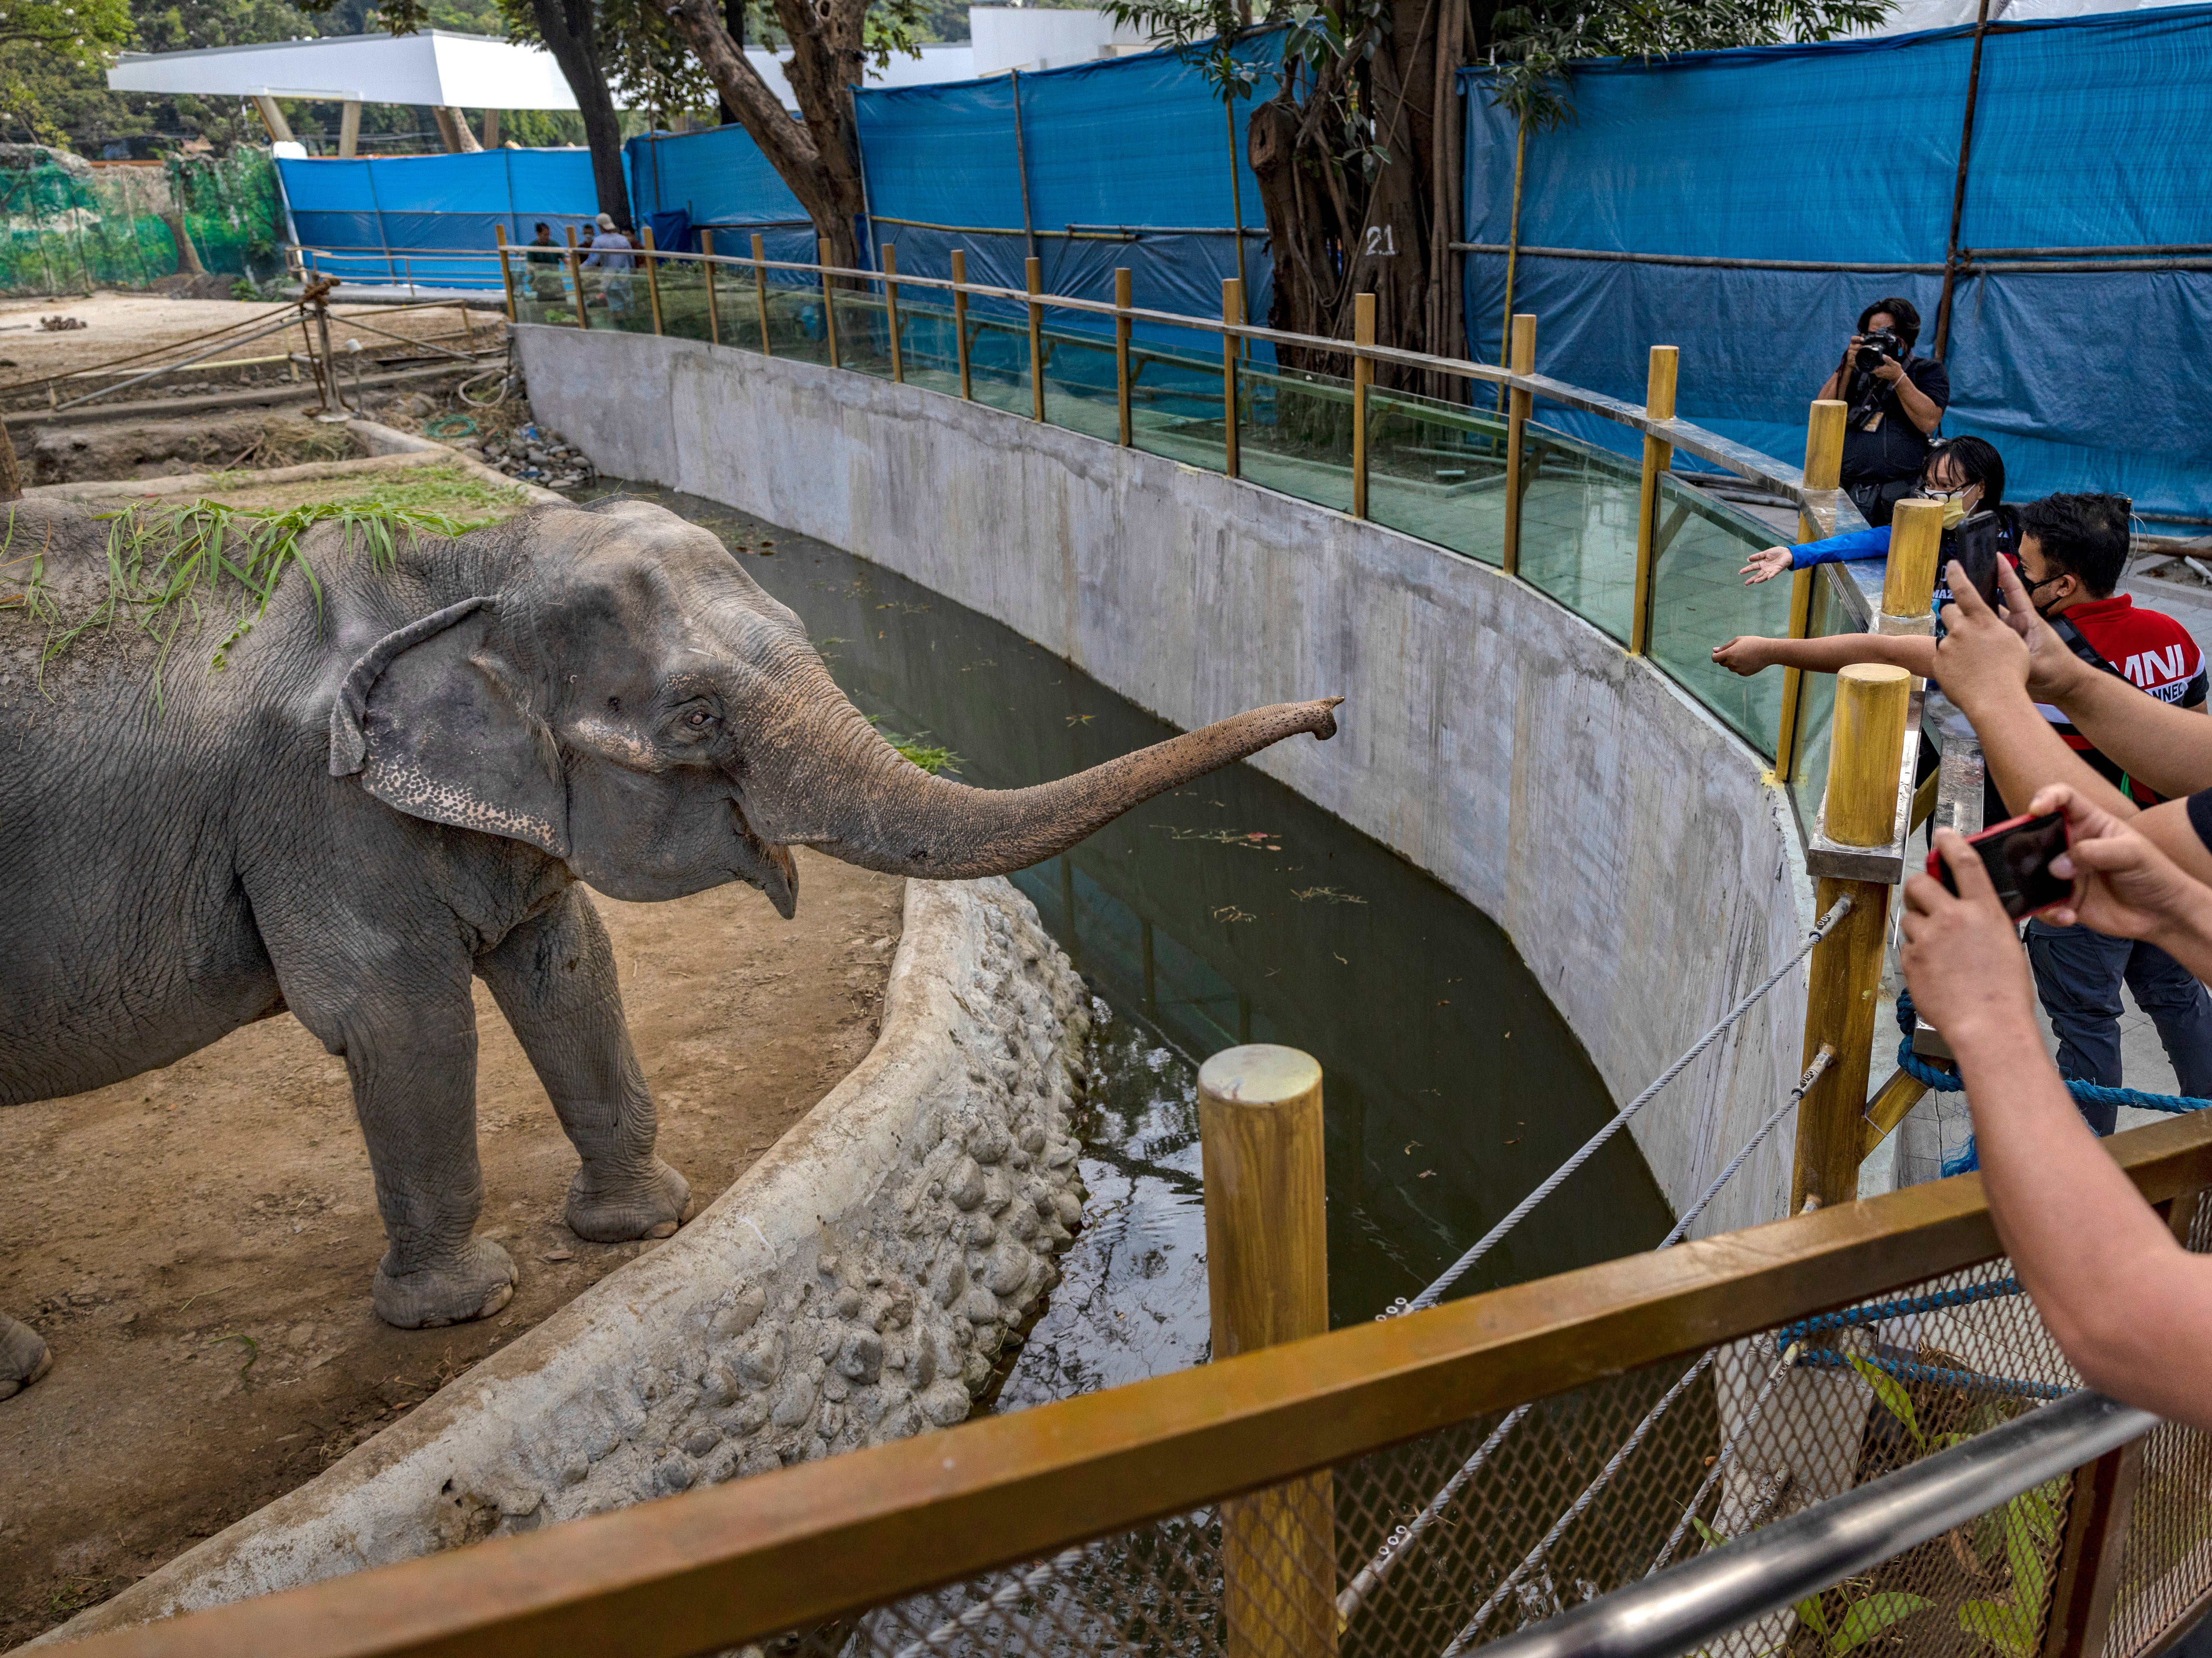 Visitors take pictures of an elephant in captivity at a zoo in Manila